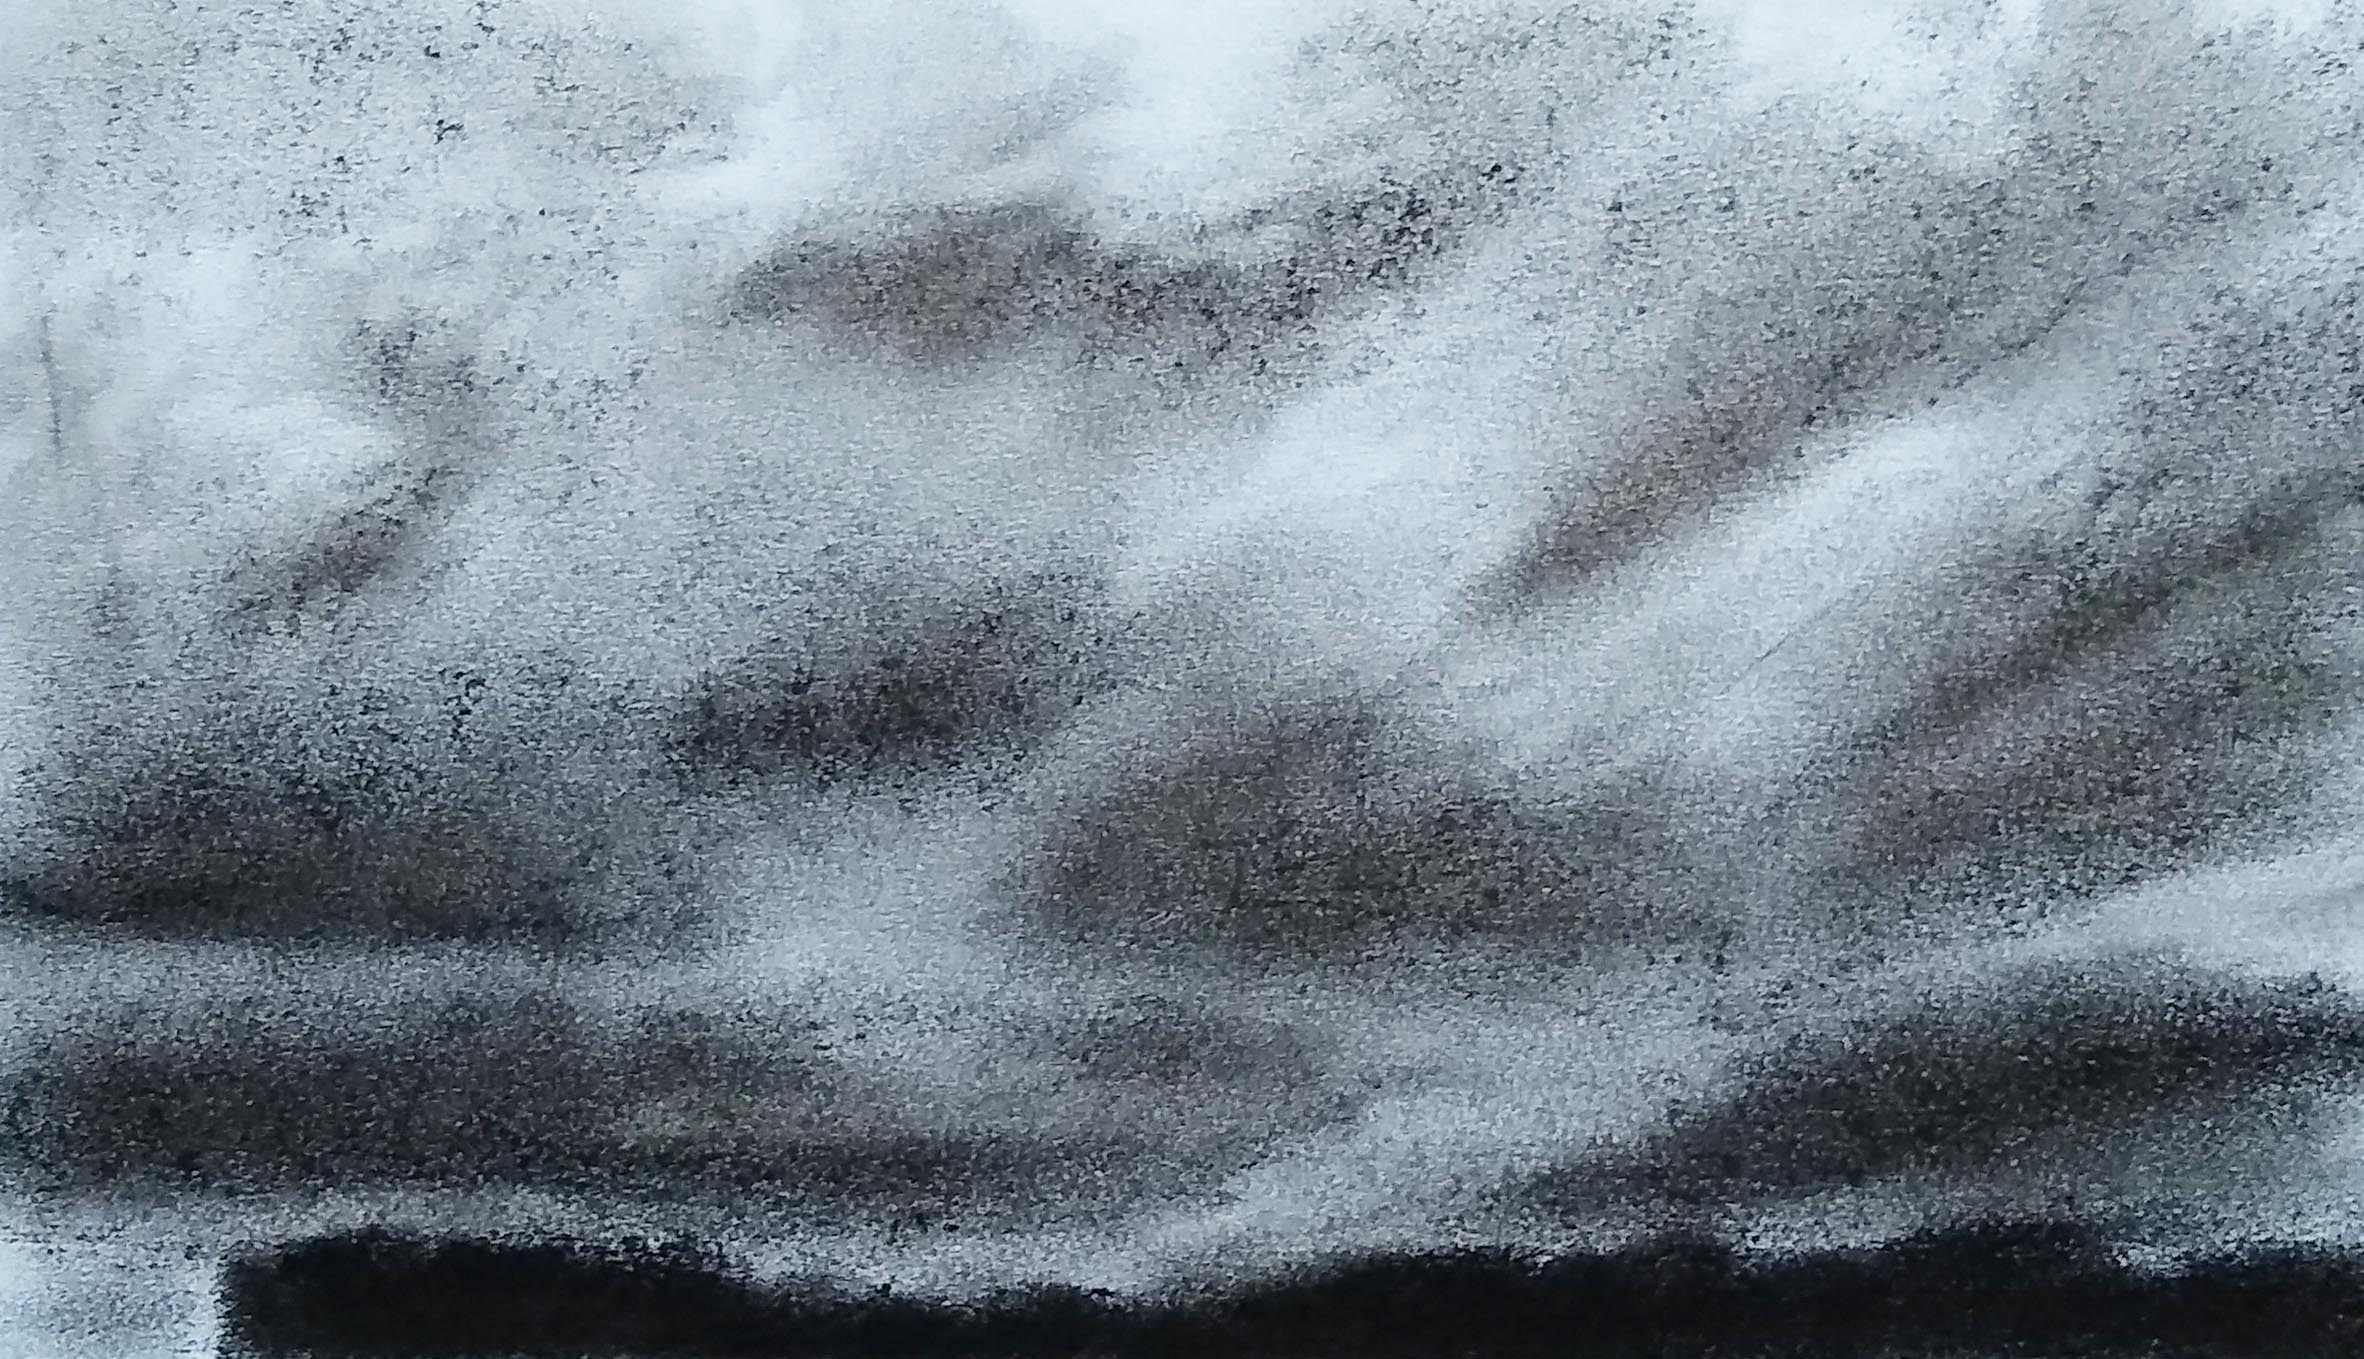 Landscape charcoal drawing